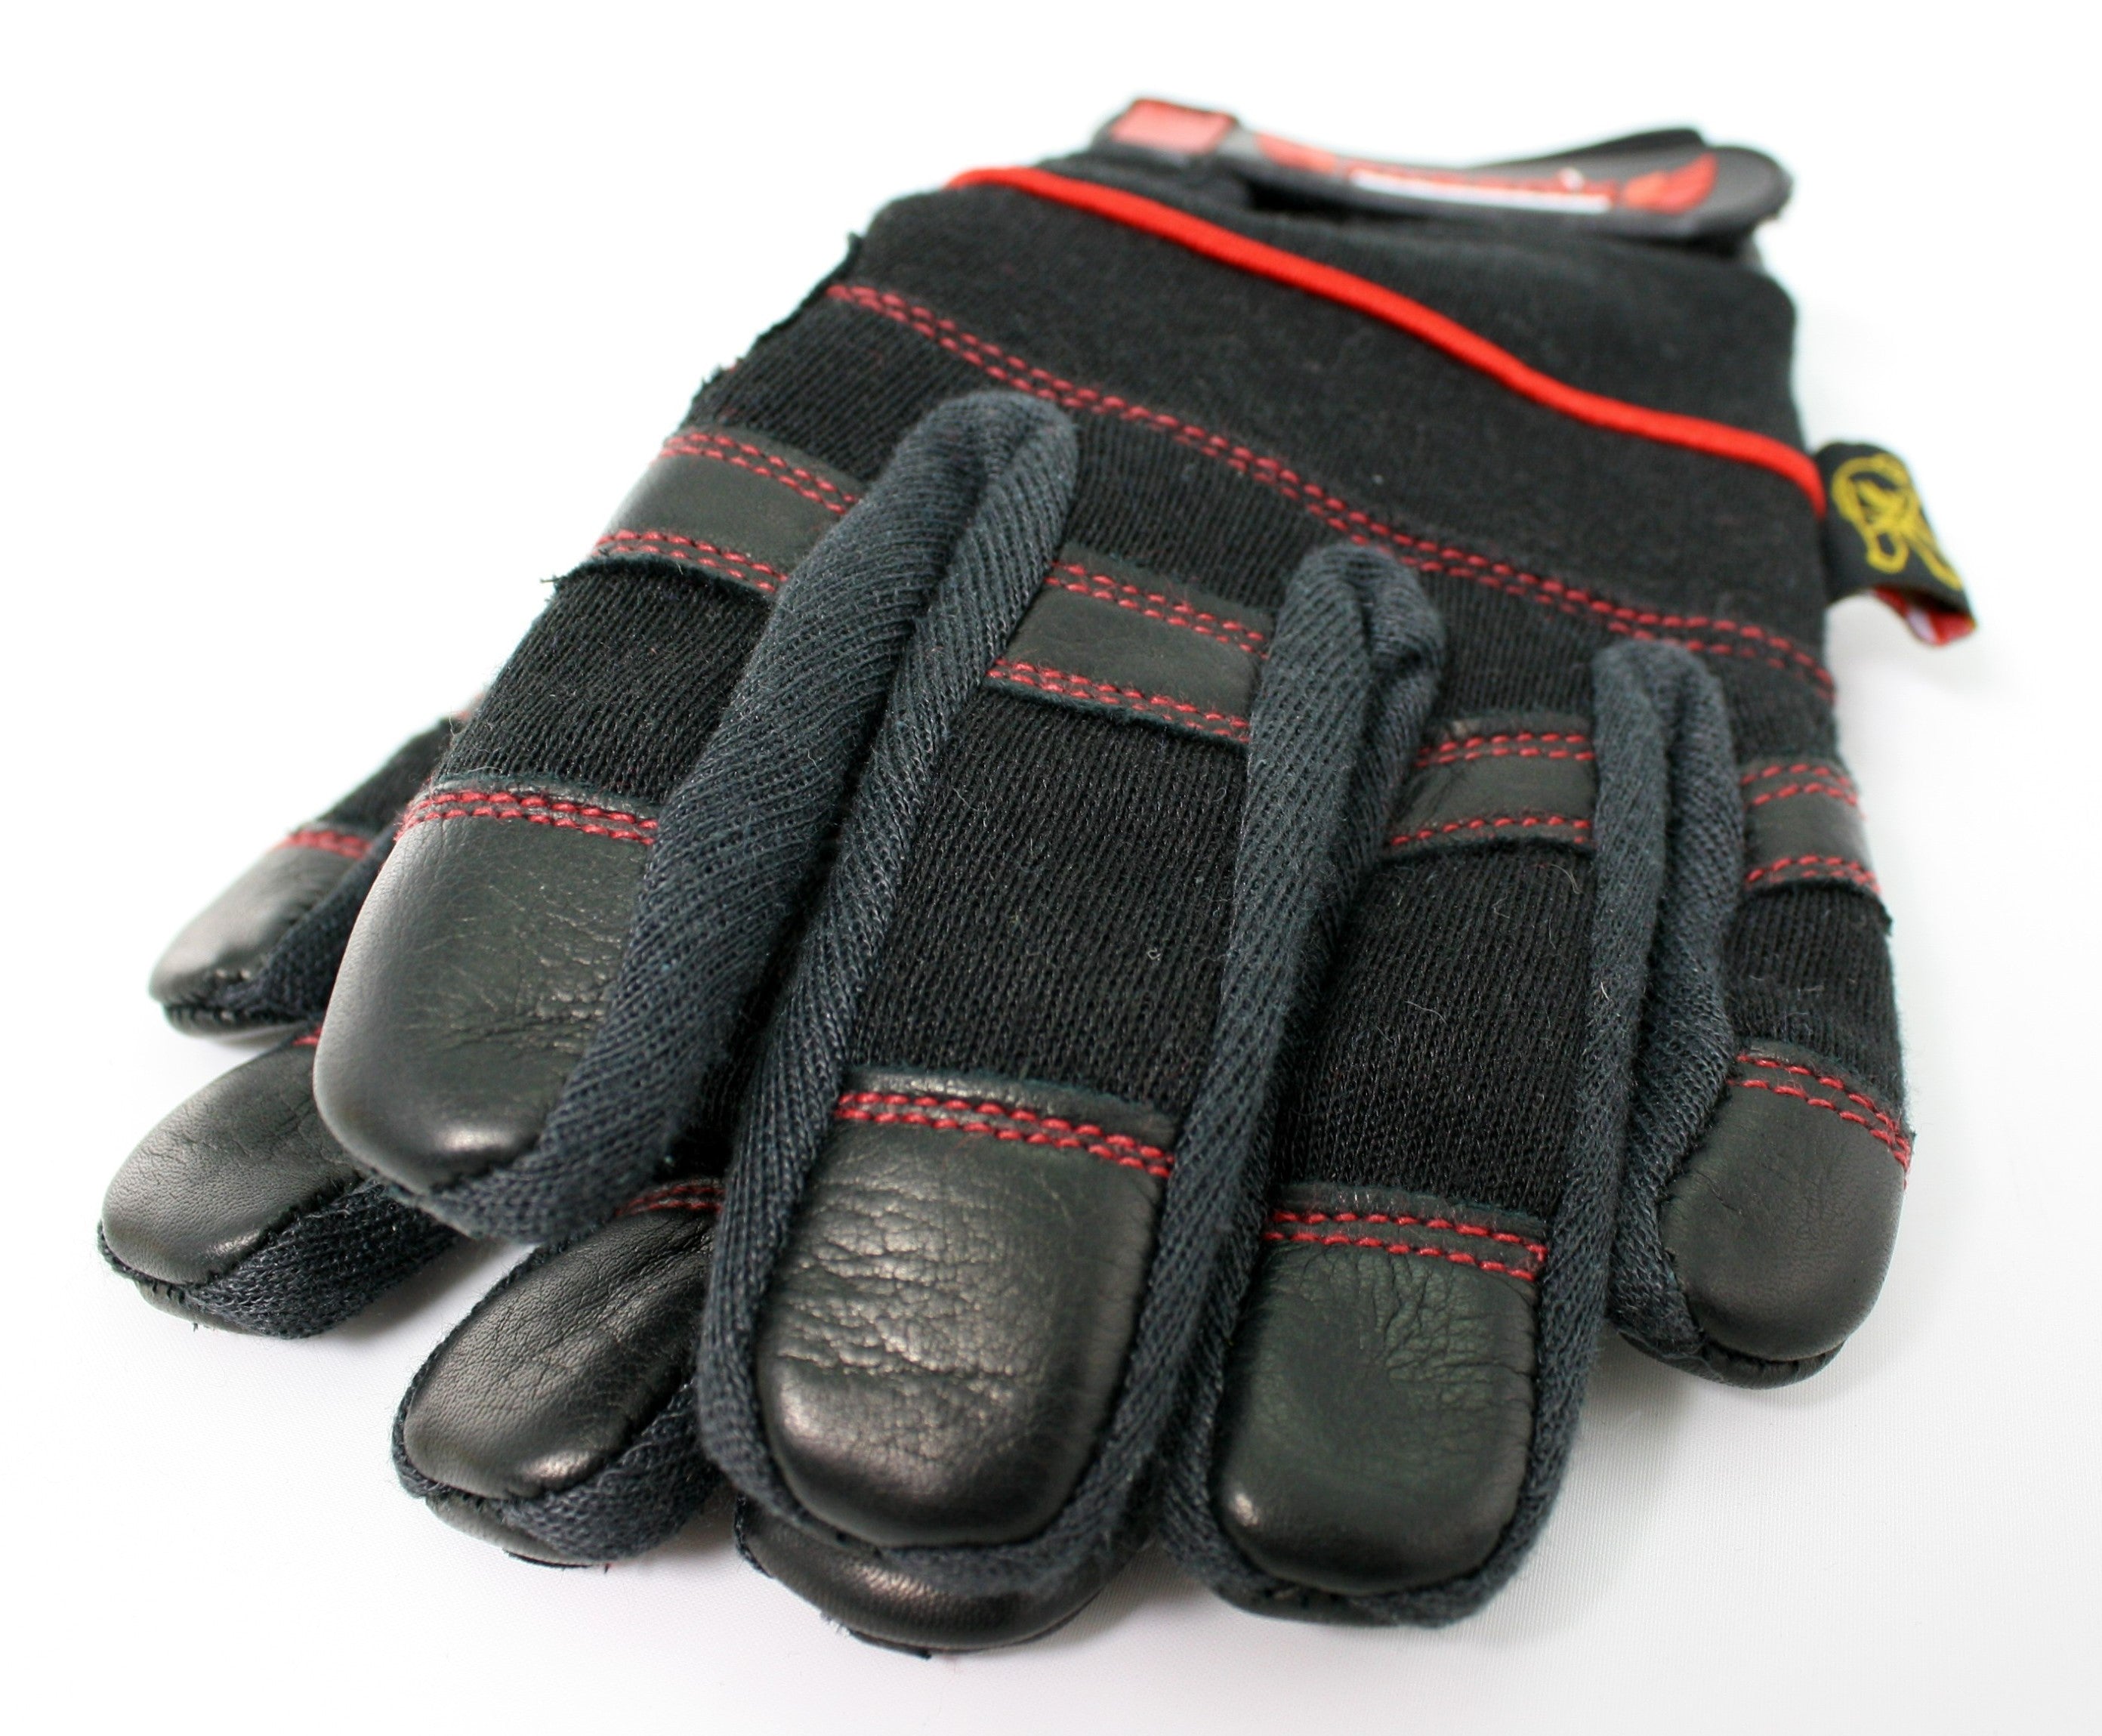 A pair of Phoenix gloves, one on top of the other, both palms down. Close up of the fingertips.